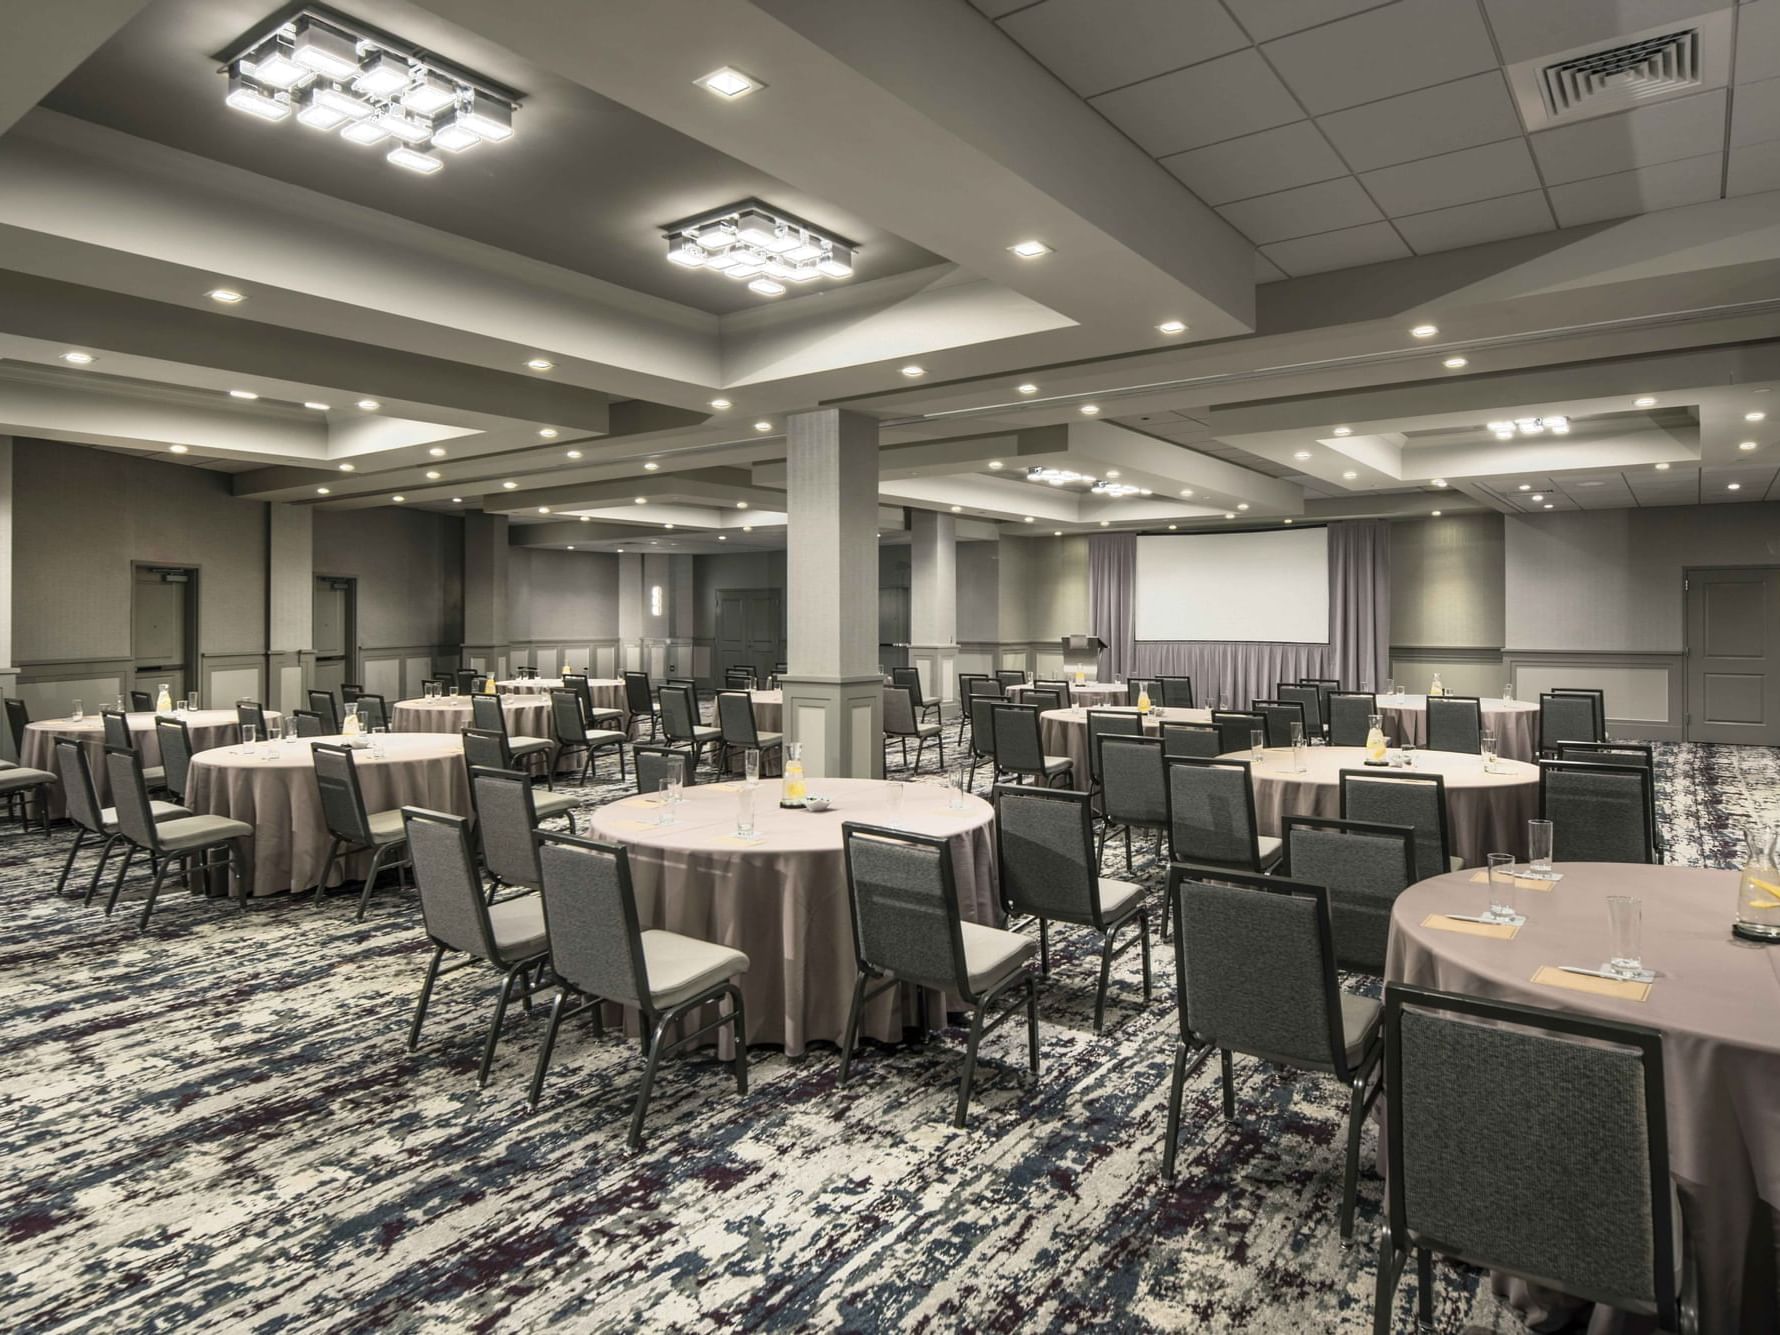 banquet room with tables, chairs and projection screen